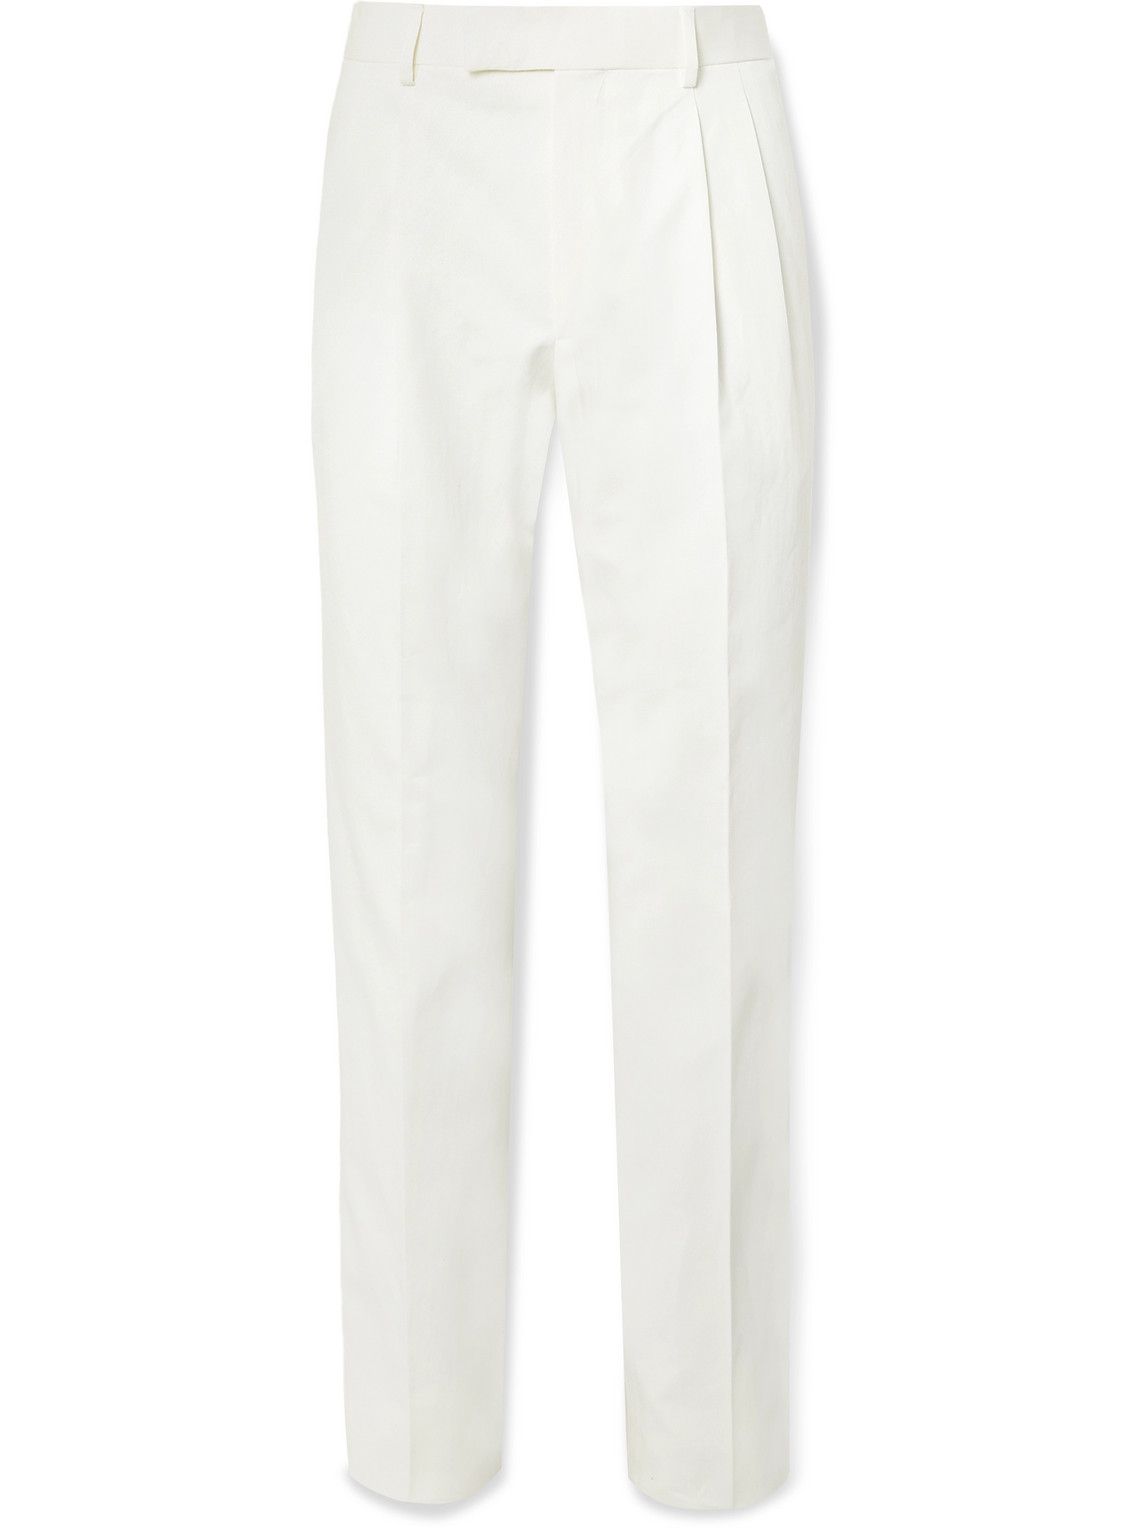 Slim-Fit Tapered Cotton and Linen-Blend Trousers